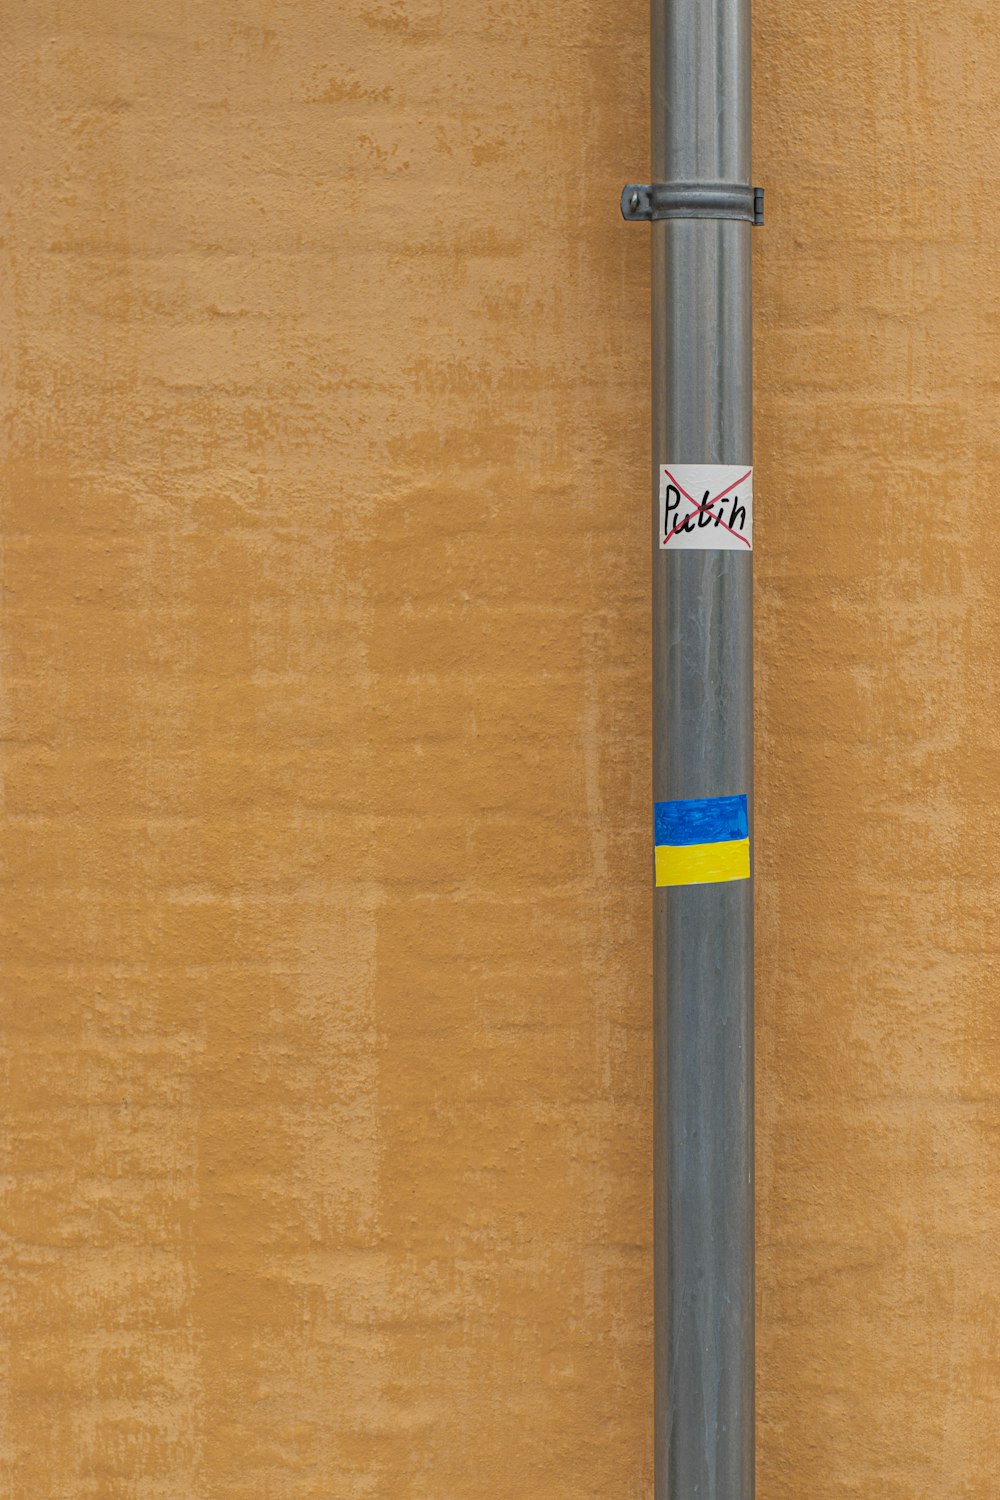 a pole with a sticker on it next to a wall